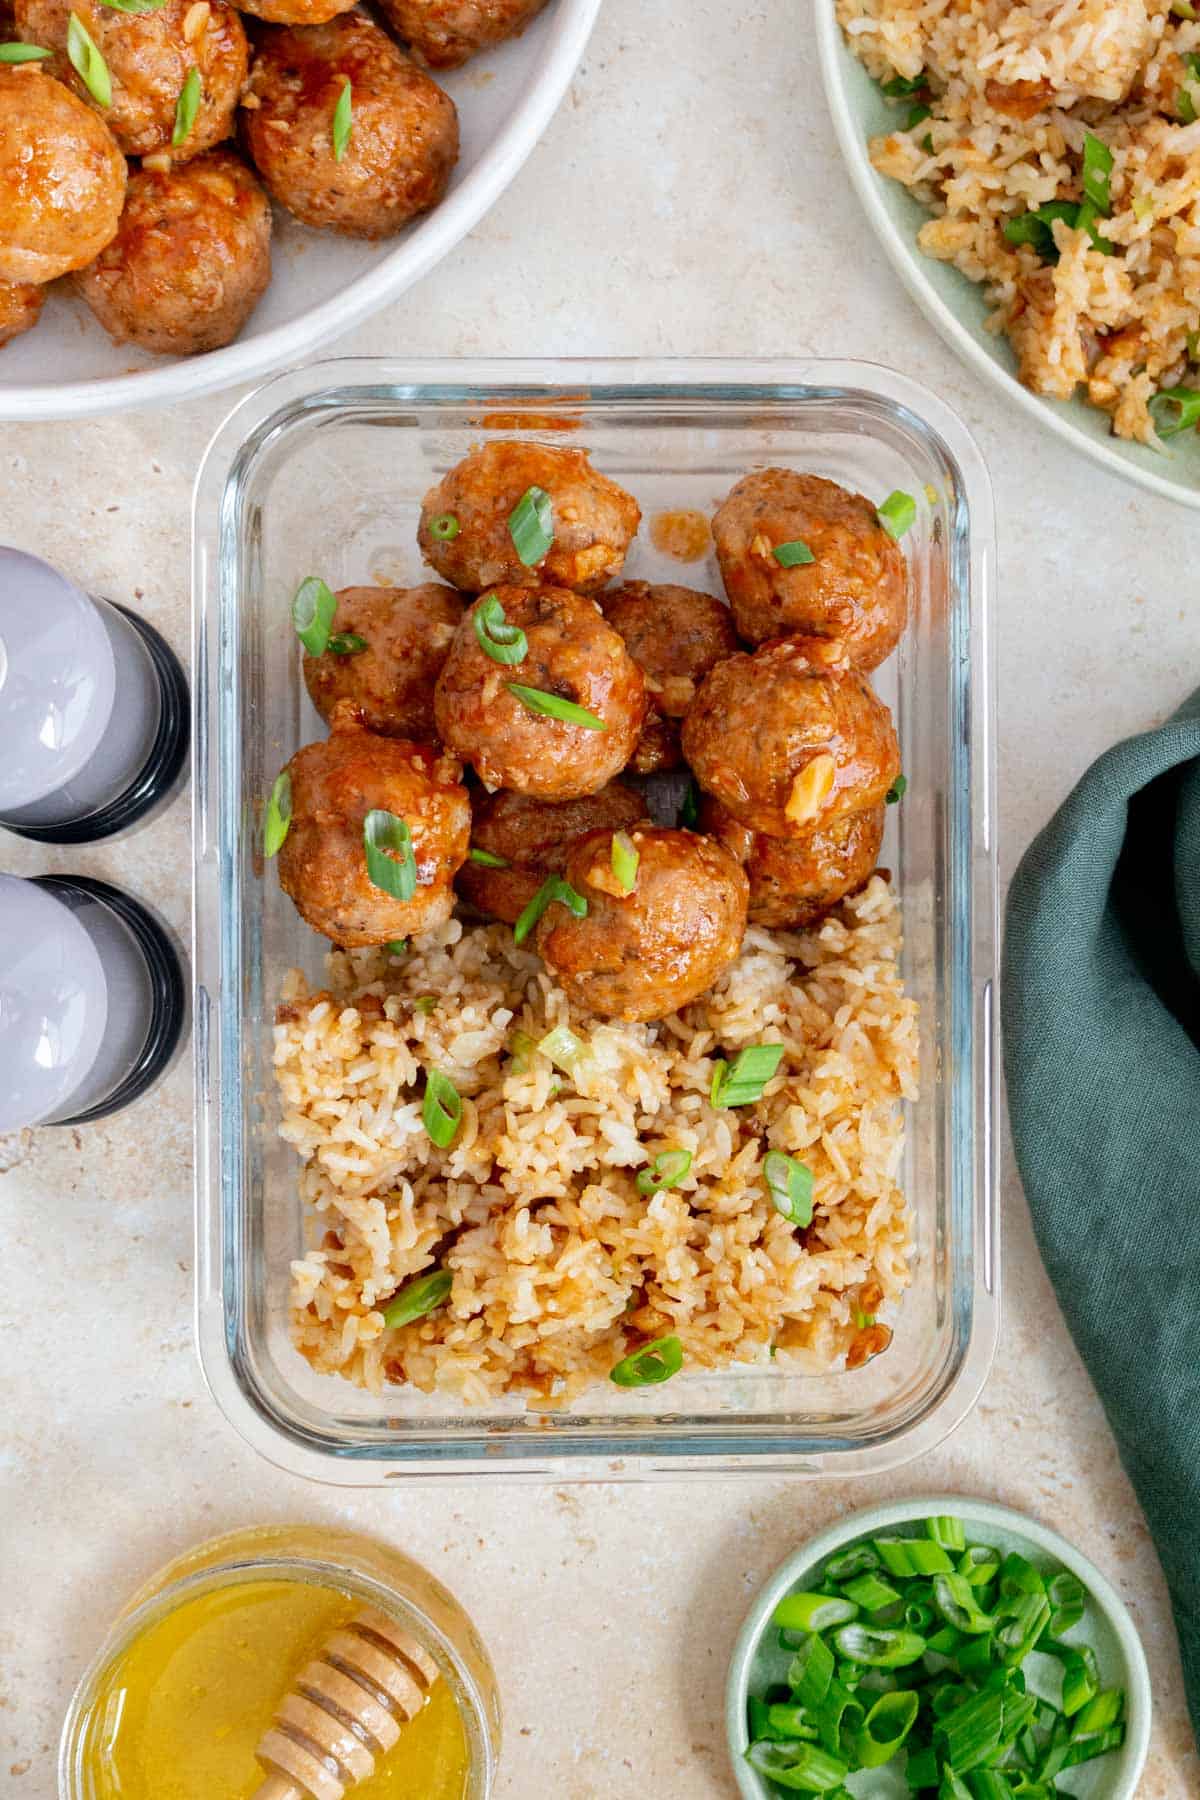 Overhead view of a meal prep container containing honey sriracha meatballs with mushrooms with a side of rice.